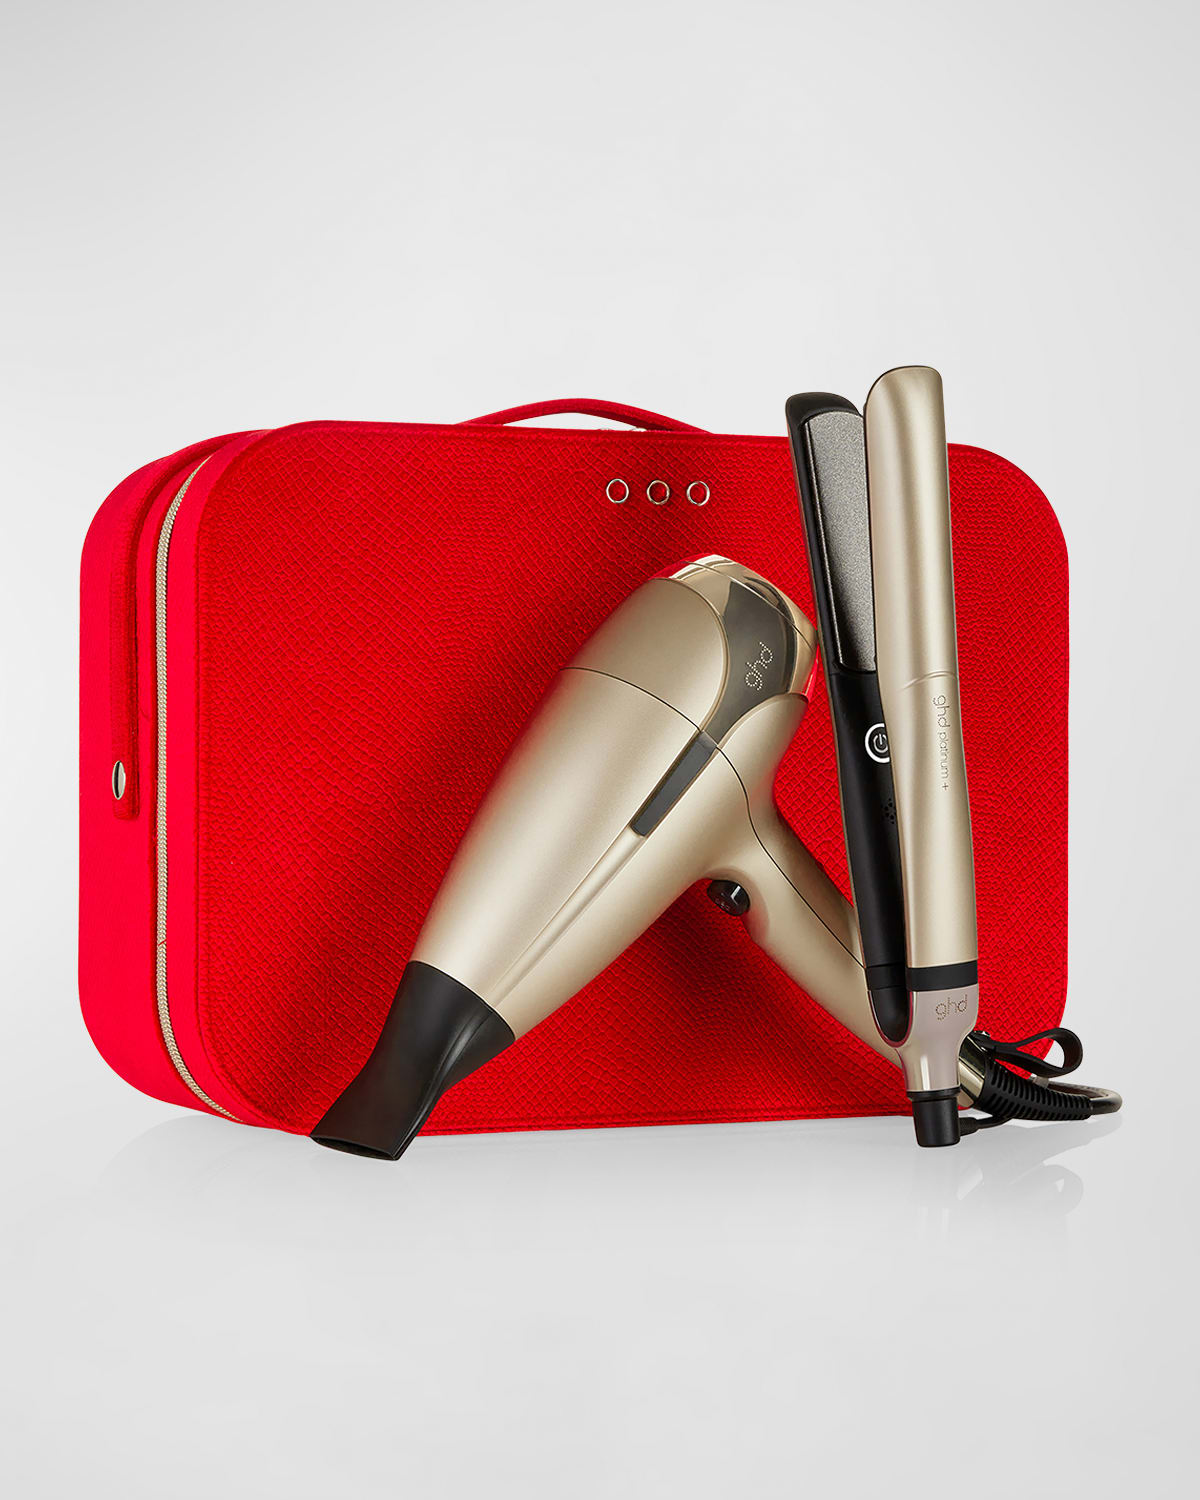 ghd Grand Luxe Platinum+ Styler and Helios Dryer Gift Set ($598 Value)